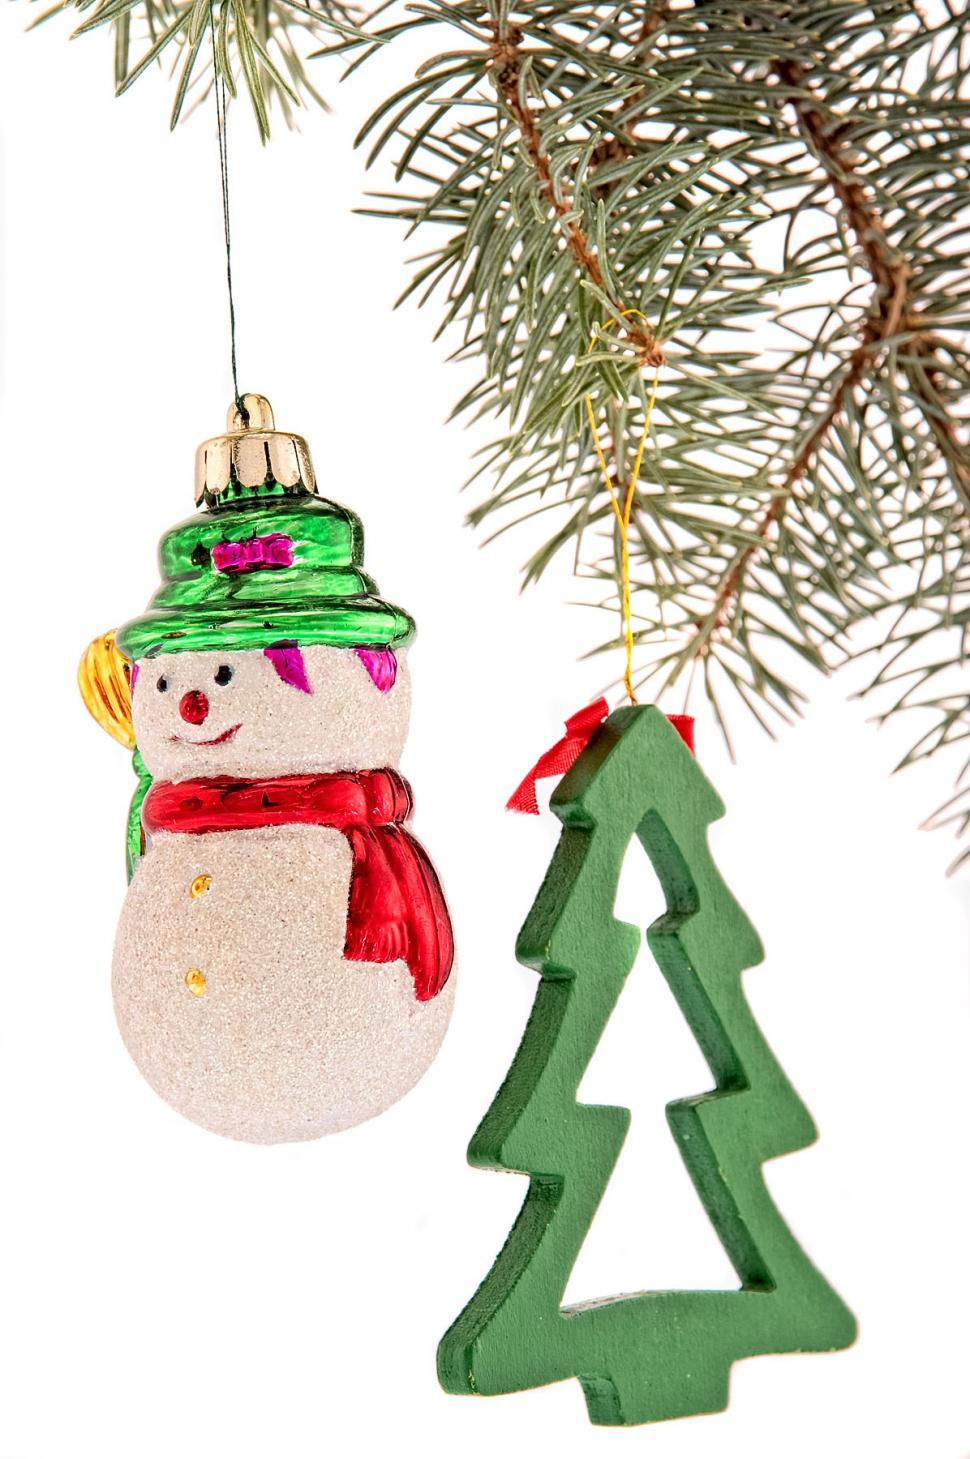 Free Image of Christmas Ornaments 